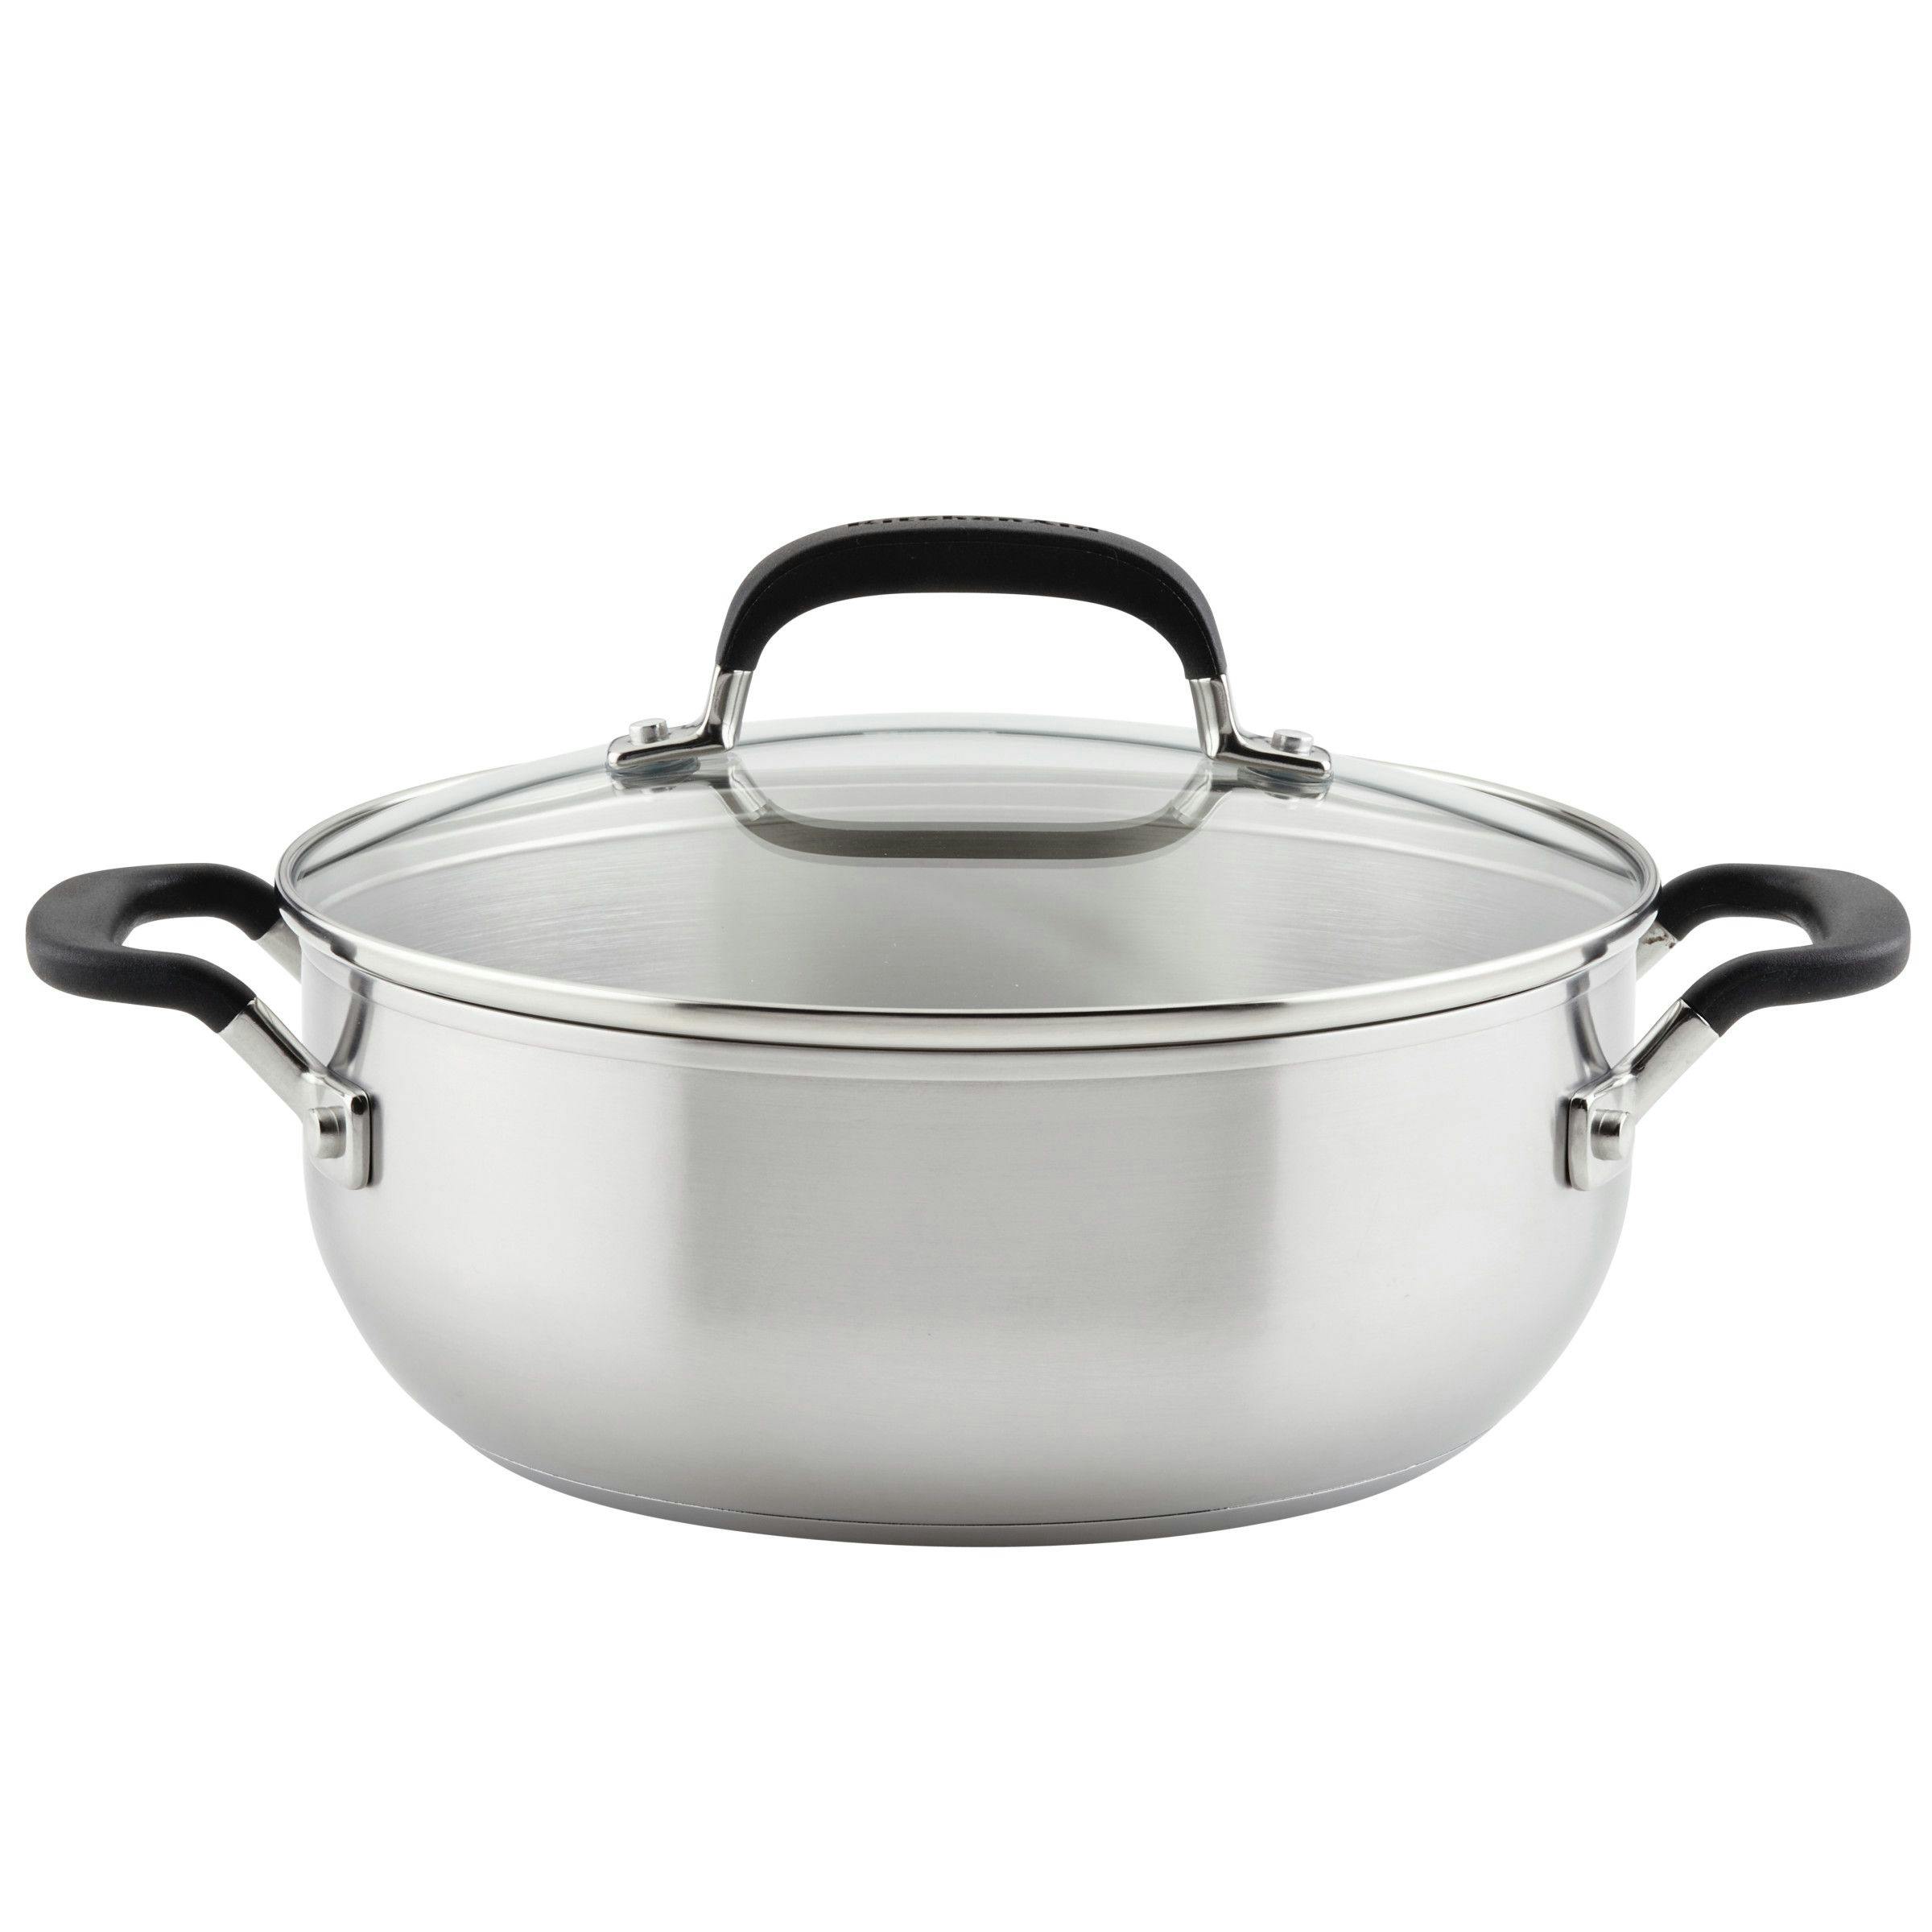 KitchenAid Stainless Steel Induction Casserole with Lid, 4-Quart, Brushed Stainless Steel